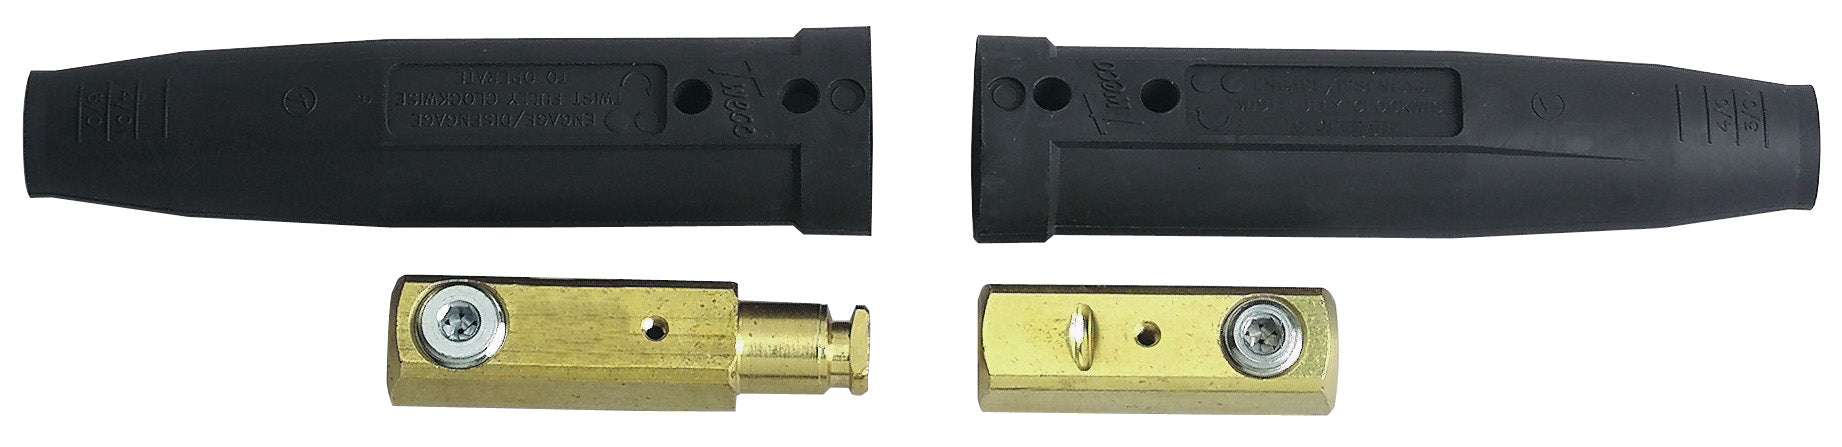 Tweco Weld Cable Connectors (Male/Female) - 2MPC